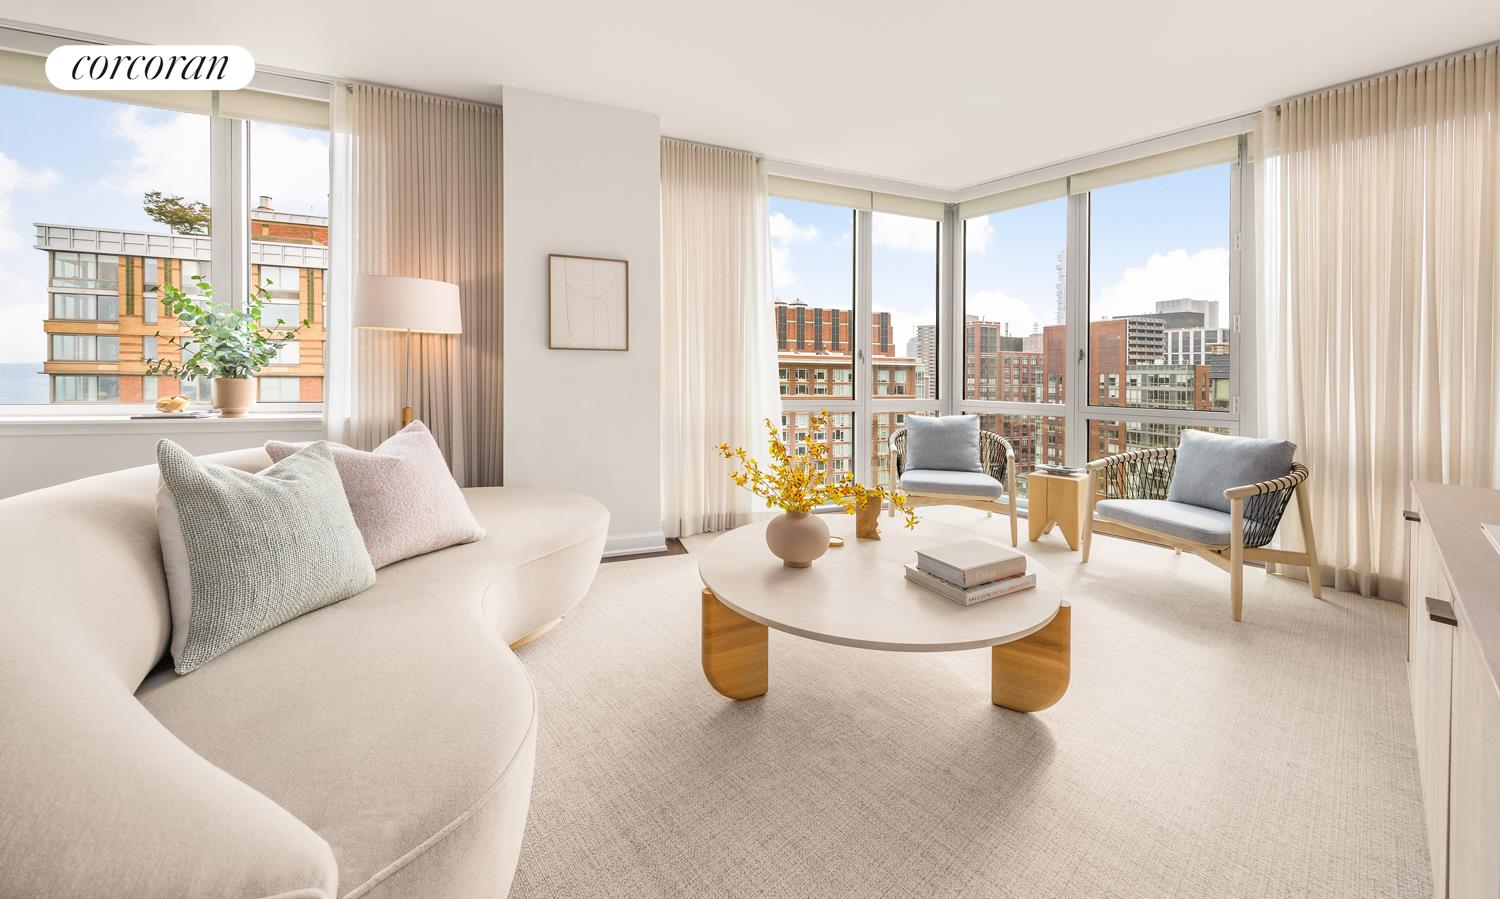 20 River Terrace 24A, Battery Park City, Downtown, NYC - 3 Bedrooms  
3 Bathrooms  
6 Rooms - 